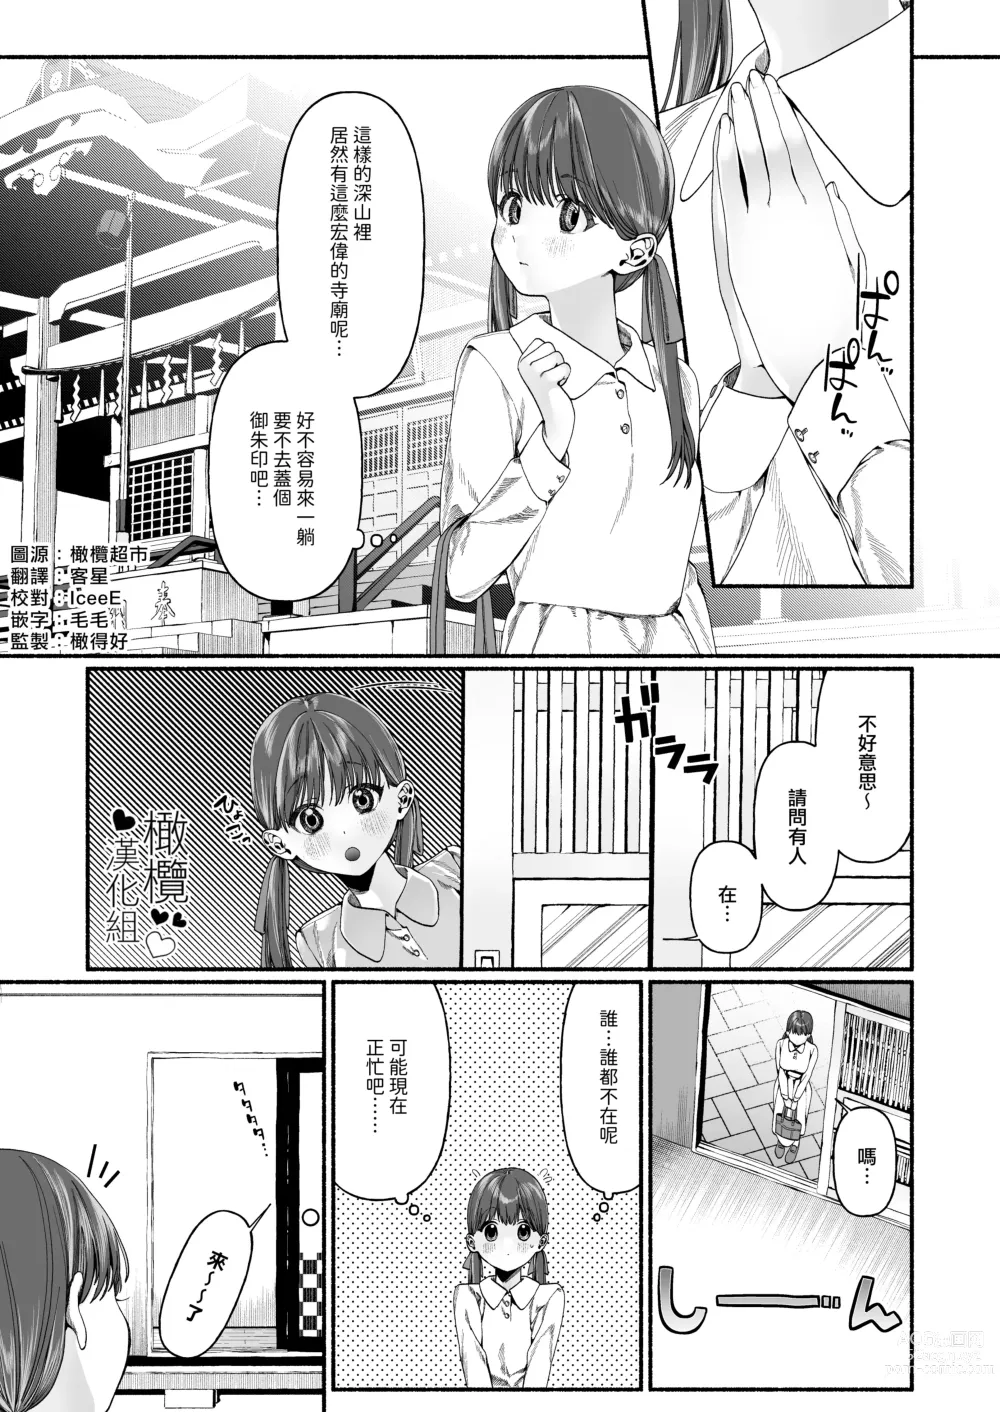 Page 1 of doujinshi 因報春鳥已死